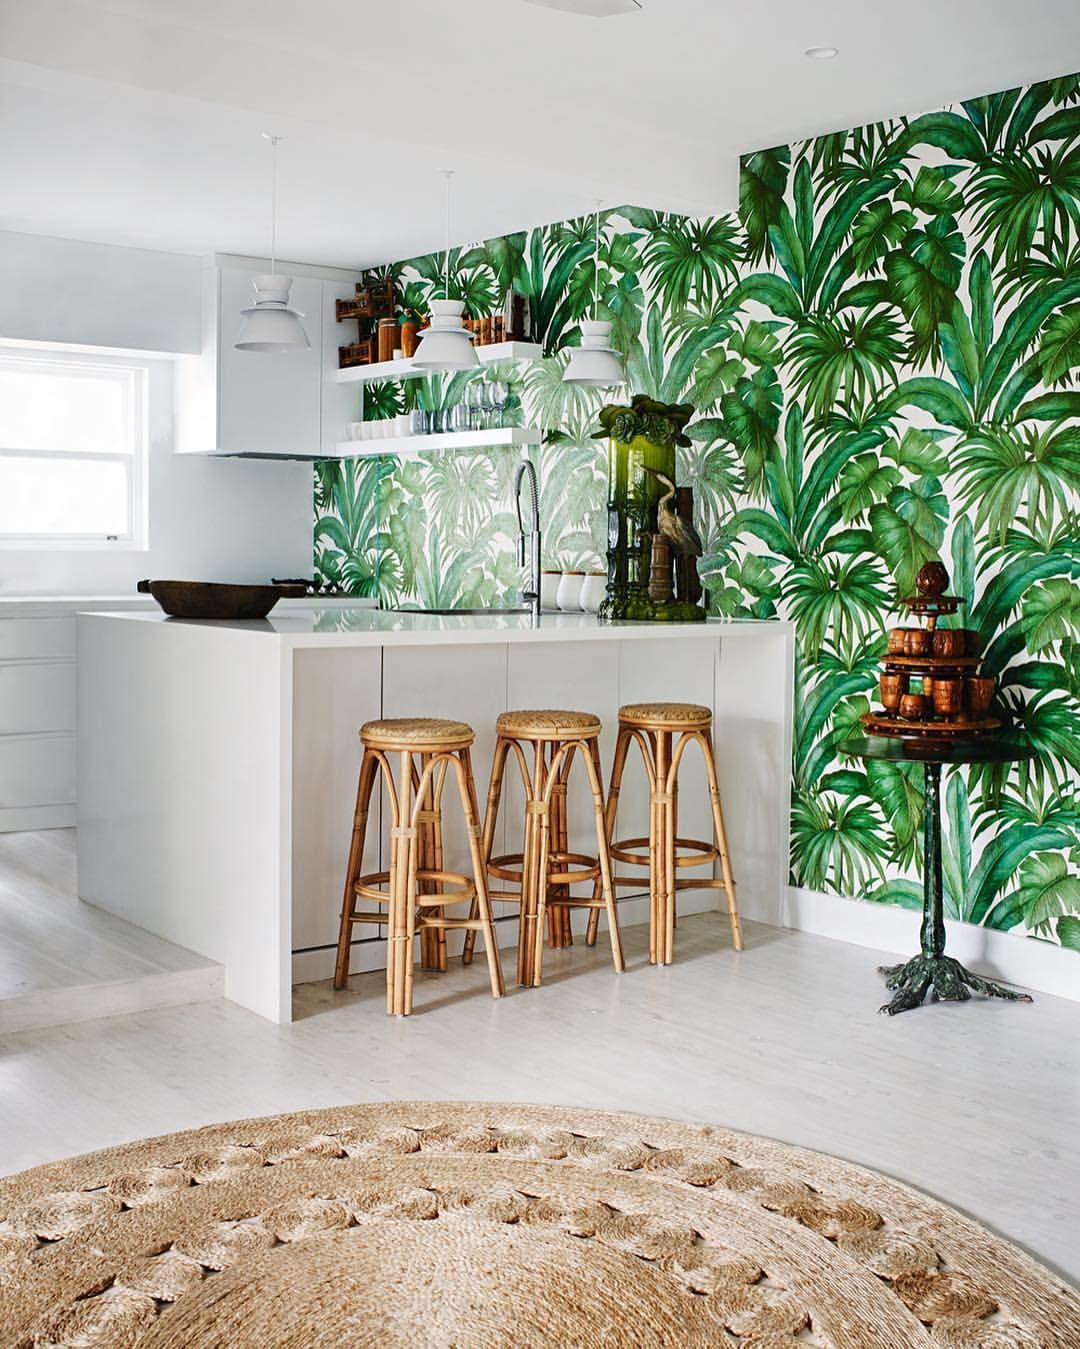 Decorate the kitchen in a tropical style, inspiring a vibrant summer - Photo 13.